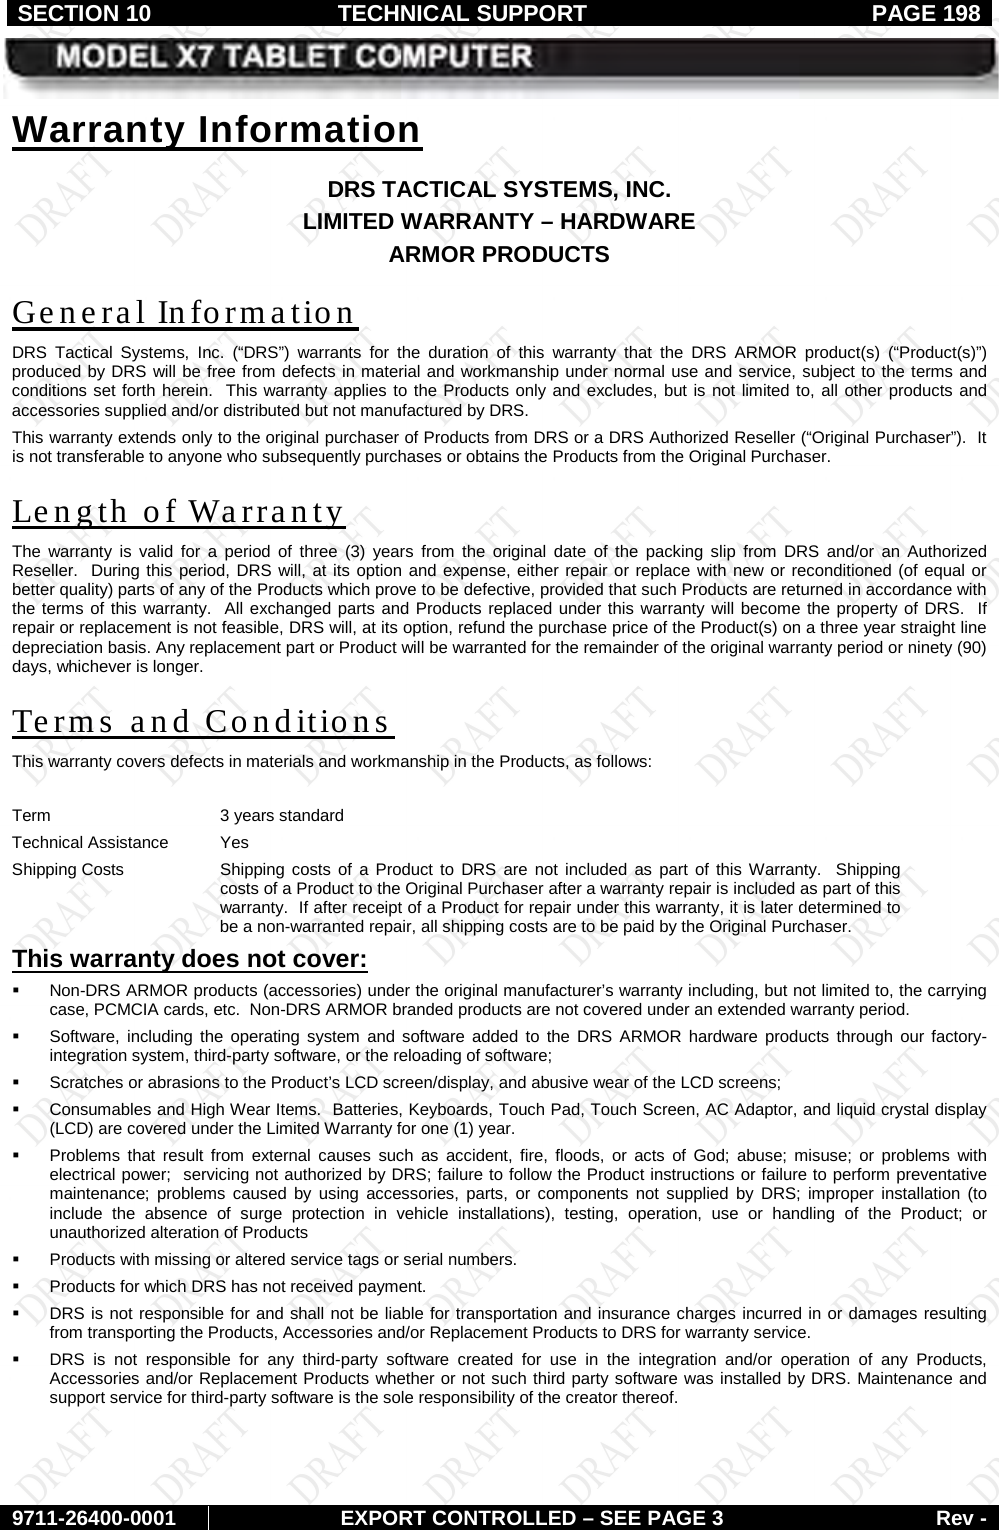 SECTION 10 TECHNICAL SUPPORT  PAGE 198     9711-26400-0001 EXPORT CONTROLLED – SEE PAGE 3 Rev - DRS TACTICAL SYSTEMS, INC. Warranty Information LIMITED WARRANTY – HARDWARE ARMOR PRODUCTS DRS Tactical Systems, Inc. (“DRS”)  warrants for the duration of this warranty that the  DRS ARMOR product(s)  (“Product(s)”) produced by DRS will be free from defects in material and workmanship under normal use and service, subject to the terms and conditions set forth herein.  This warranty applies to the Products only and excludes, but is not limited to, all other products and accessories supplied and/or distributed but not manufactured by DRS.   General Information This warranty extends only to the original purchaser of Products from DRS or a DRS Authorized Reseller (“Original Purchaser”).  It is not transferable to anyone who subsequently purchases or obtains the Products from the Original Purchaser. The warranty is valid for a period of three (3) years  from the original date of the packing slip from DRS and/or an Authorized Reseller.  During this period, DRS will, at its option and expense, either repair or replace with new or reconditioned (of equal or better quality) parts of any of the Products which prove to be defective, provided that such Products are returned in accordance with the terms of this warranty.  All exchanged parts and Products replaced under this warranty will become the property of DRS.  If repair or replacement is not feasible, DRS will, at its option, refund the purchase price of the Product(s) on a three year straight line depreciation basis. Any replacement part or Product will be warranted for the remainder of the original warranty period or ninety (90) days, whichever is longer. Length of Warranty This warranty covers defects in materials and workmanship in the Products, as follows: Terms and Conditions  Term 3 years standard Technical Assistance Yes Shipping Costs Shipping costs of a Product to DRS are not included as part of this Warranty.  Shipping costs of a Product to the Original Purchaser after a warranty repair is included as part of this warranty.  If after receipt of a Product for repair under this warranty, it is later determined to be a non-warranted repair, all shipping costs are to be paid by the Original Purchaser.  Non-DRS ARMOR products (accessories) under the original manufacturer’s warranty including, but not limited to, the carrying case, PCMCIA cards, etc.  Non-DRS ARMOR branded products are not covered under an extended warranty period. This warranty does not cover:   Software, including the operating system and software added to the DRS ARMOR hardware products through our factory-integration system, third-party software, or the reloading of software;  Scratches or abrasions to the Product’s LCD screen/display, and abusive wear of the LCD screens;  Consumables and High Wear Items.  Batteries, Keyboards, Touch Pad, Touch Screen, AC Adaptor, and liquid crystal display (LCD) are covered under the Limited Warranty for one (1) year.   Problems that result from external causes such as accident, fire, floods, or acts of God; abuse; misuse; or problems with electrical power;  servicing not authorized by DRS; failure to follow the Product instructions or failure to perform preventative maintenance; problems caused by using accessories, parts, or components not supplied by DRS; improper installation (to include the absence of surge protection in vehicle installations), testing, operation, use or handling of the Product; or unauthorized alteration of Products  Products with missing or altered service tags or serial numbers.  Products for which DRS has not received payment.  DRS is not responsible for and shall not be liable for transportation and insurance charges incurred in or damages resulting from transporting the Products, Accessories and/or Replacement Products to DRS for warranty service.  DRS is not responsible for any third-party software created for use in the integration and/or operation of any Products, Accessories and/or Replacement Products whether or not such third party software was installed by DRS. Maintenance and support service for third-party software is the sole responsibility of the creator thereof.  